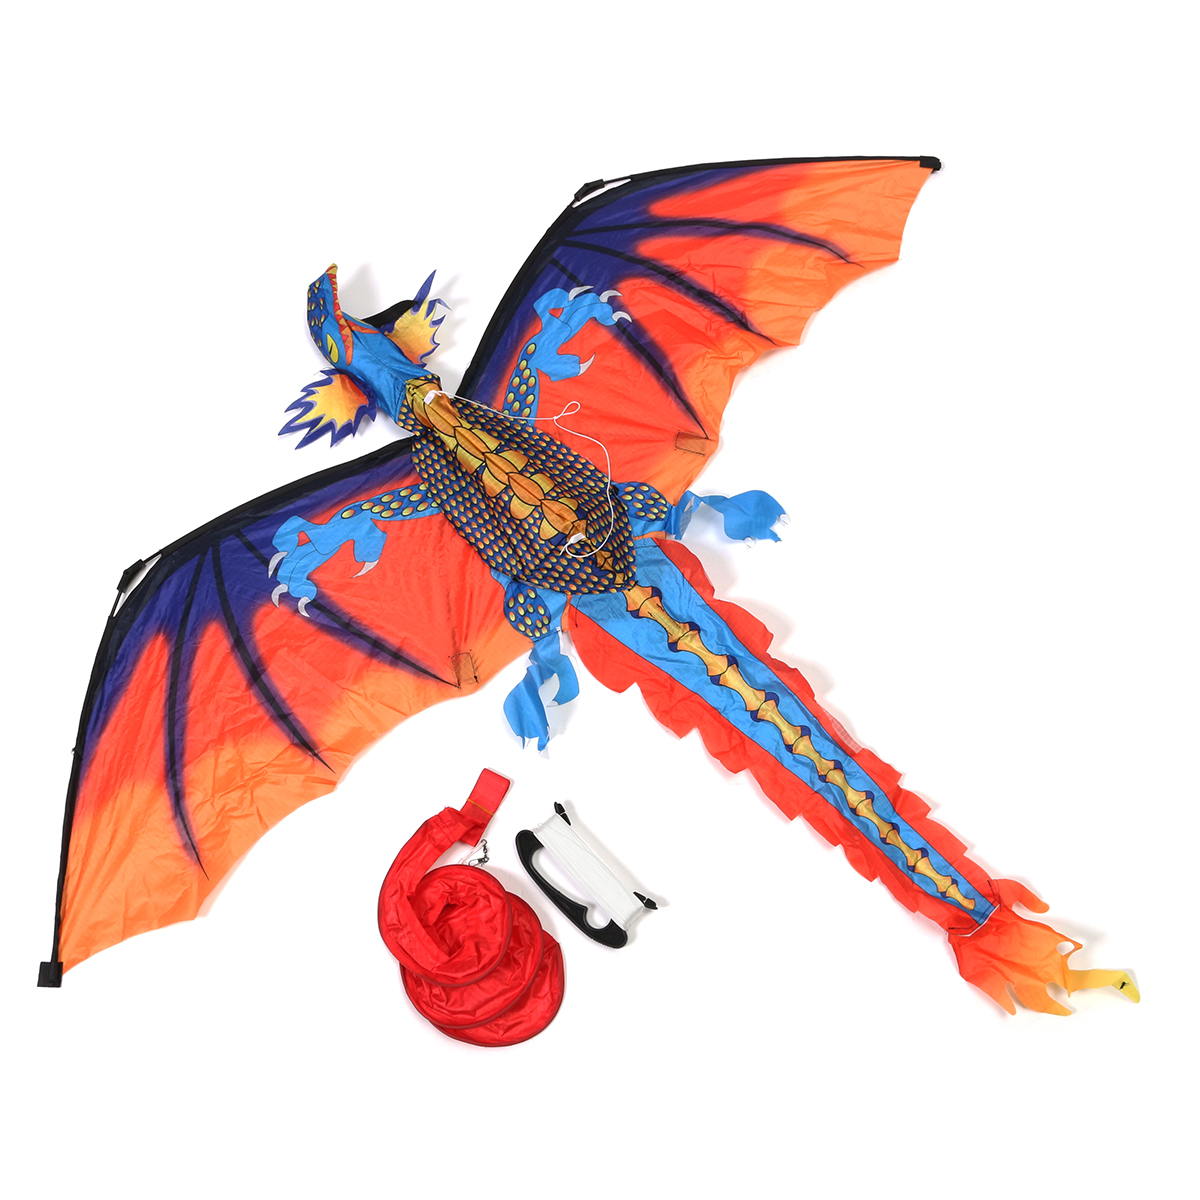 55-Inches-Cute-Classical-Dragon-Kite-140cm-x-120cm-Single-Line-Kite-With-Tail-1171017